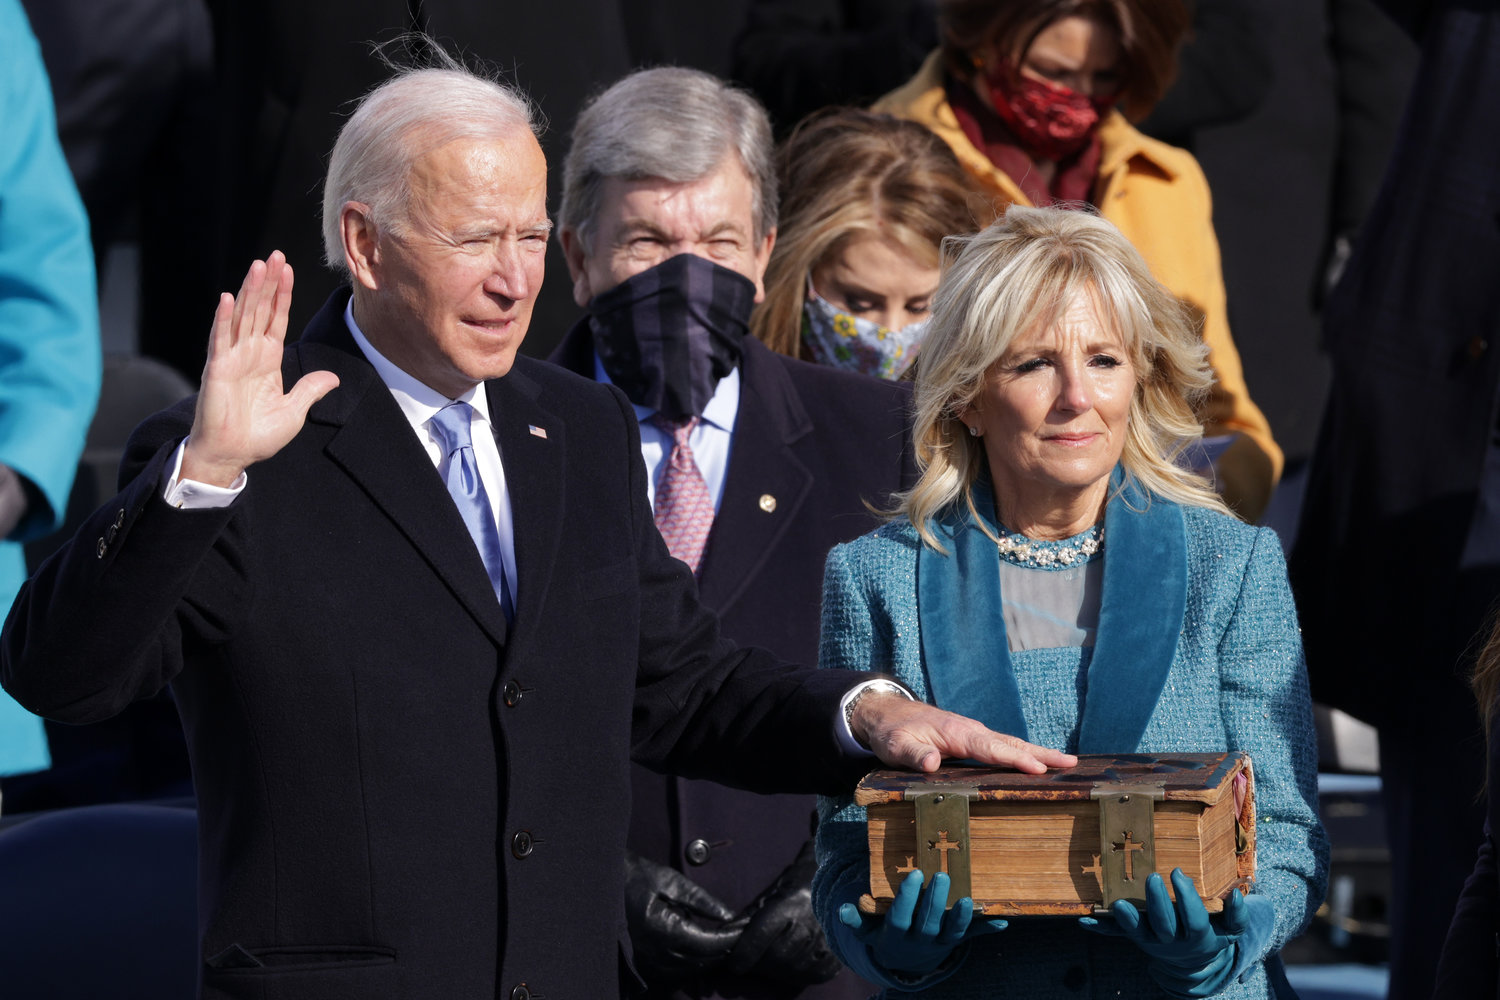 Joe Biden is sworn in as U.S. President during his inauguration on the West Front of the U.S. Capitol on January 20, 2021, in Washington, DC.